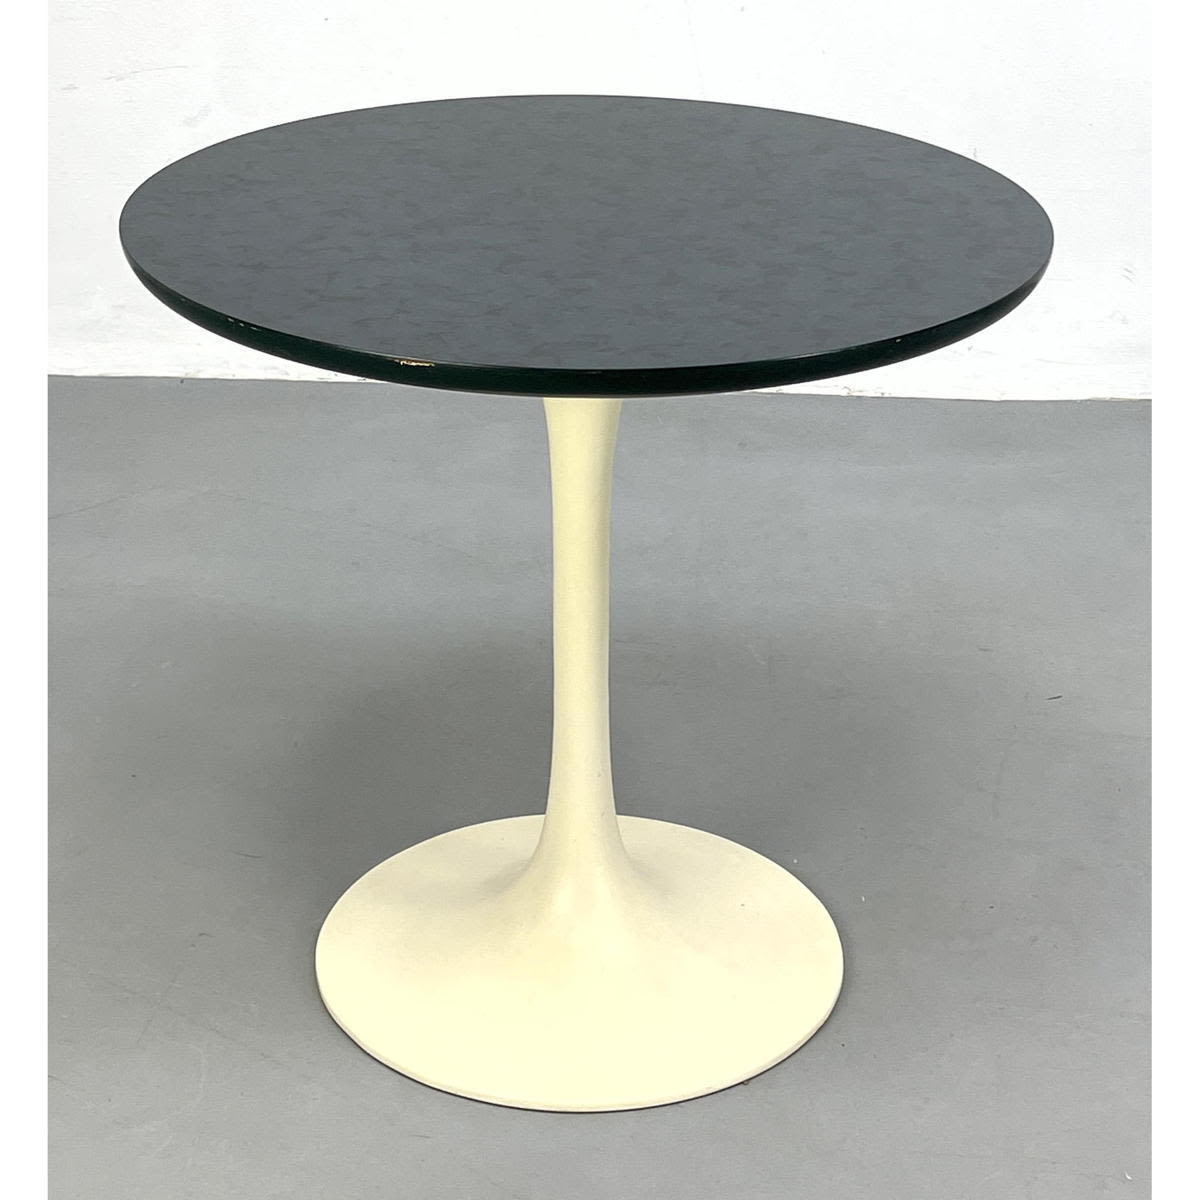 BURKE Tulip Side End Table. Round